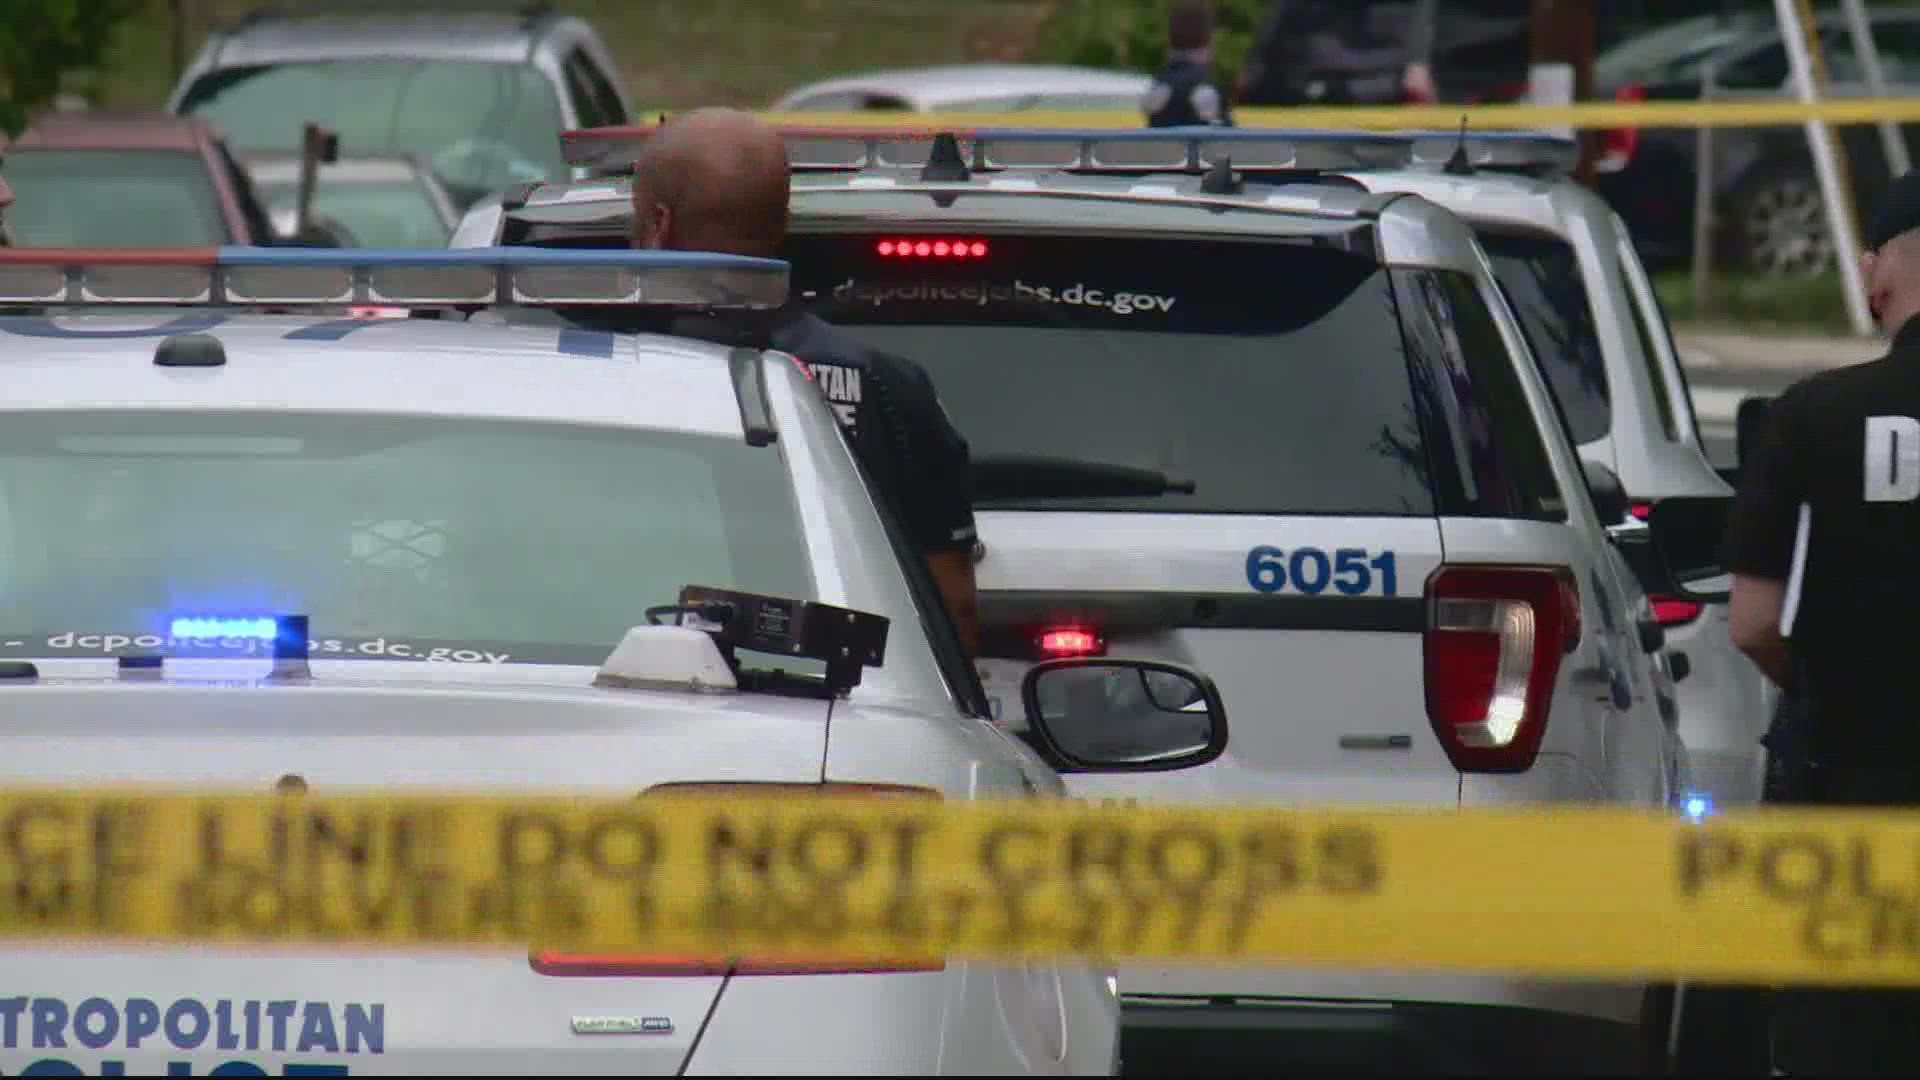 D.C. Police are investigating several shootings that occurred during the weekend that left four people dead, including a 15-year-old and an 18-year-old.